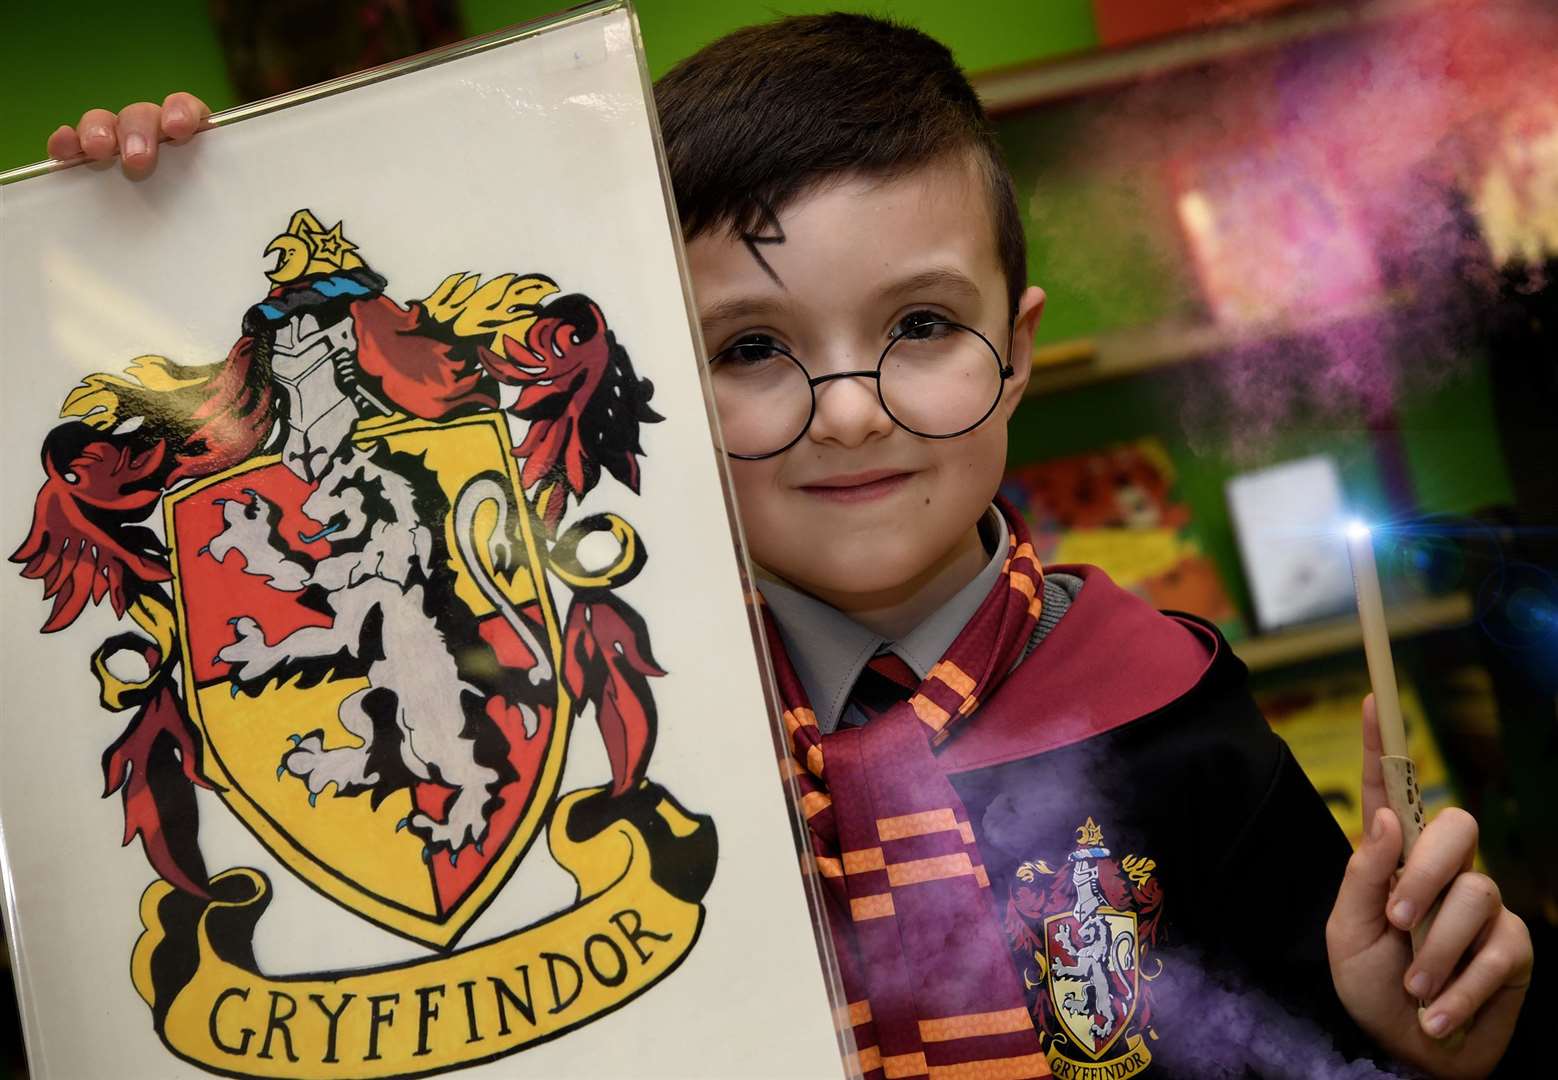 Children going to Hogwarts would need 48 items including wands, broomsticks and books